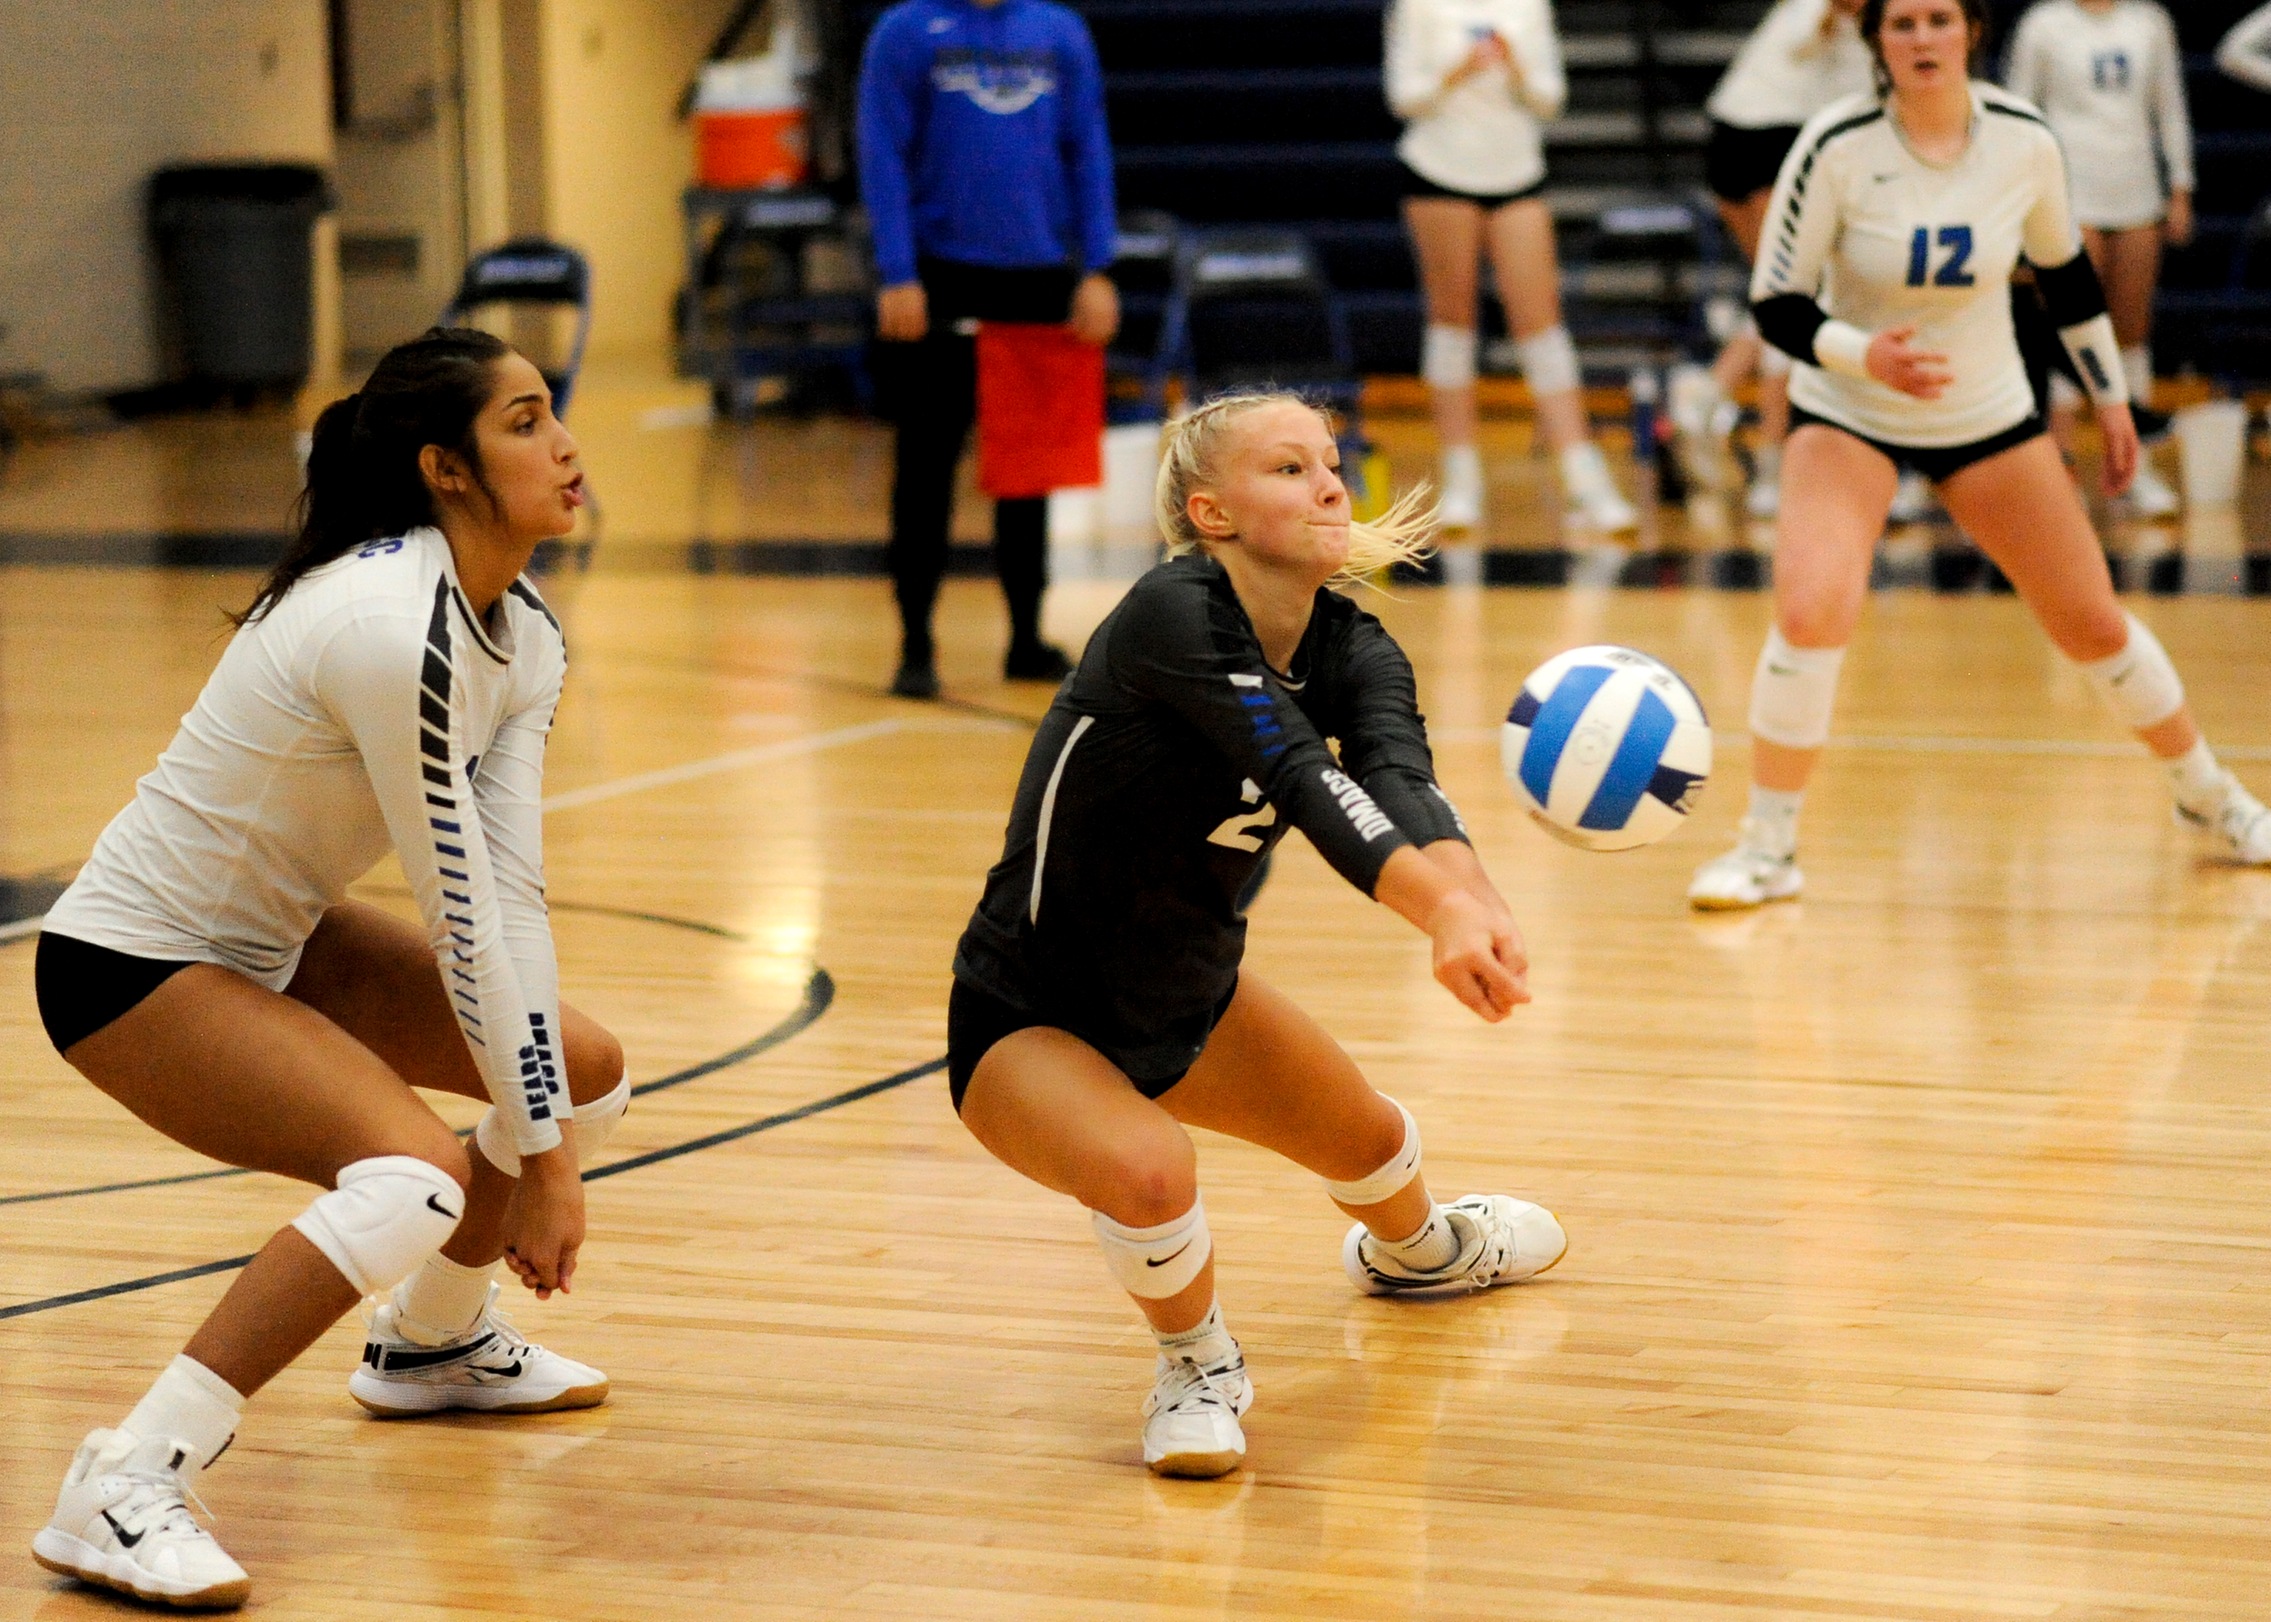 DMACC volleyball team ends two match losing streak with 3-0 win against Ellsworth